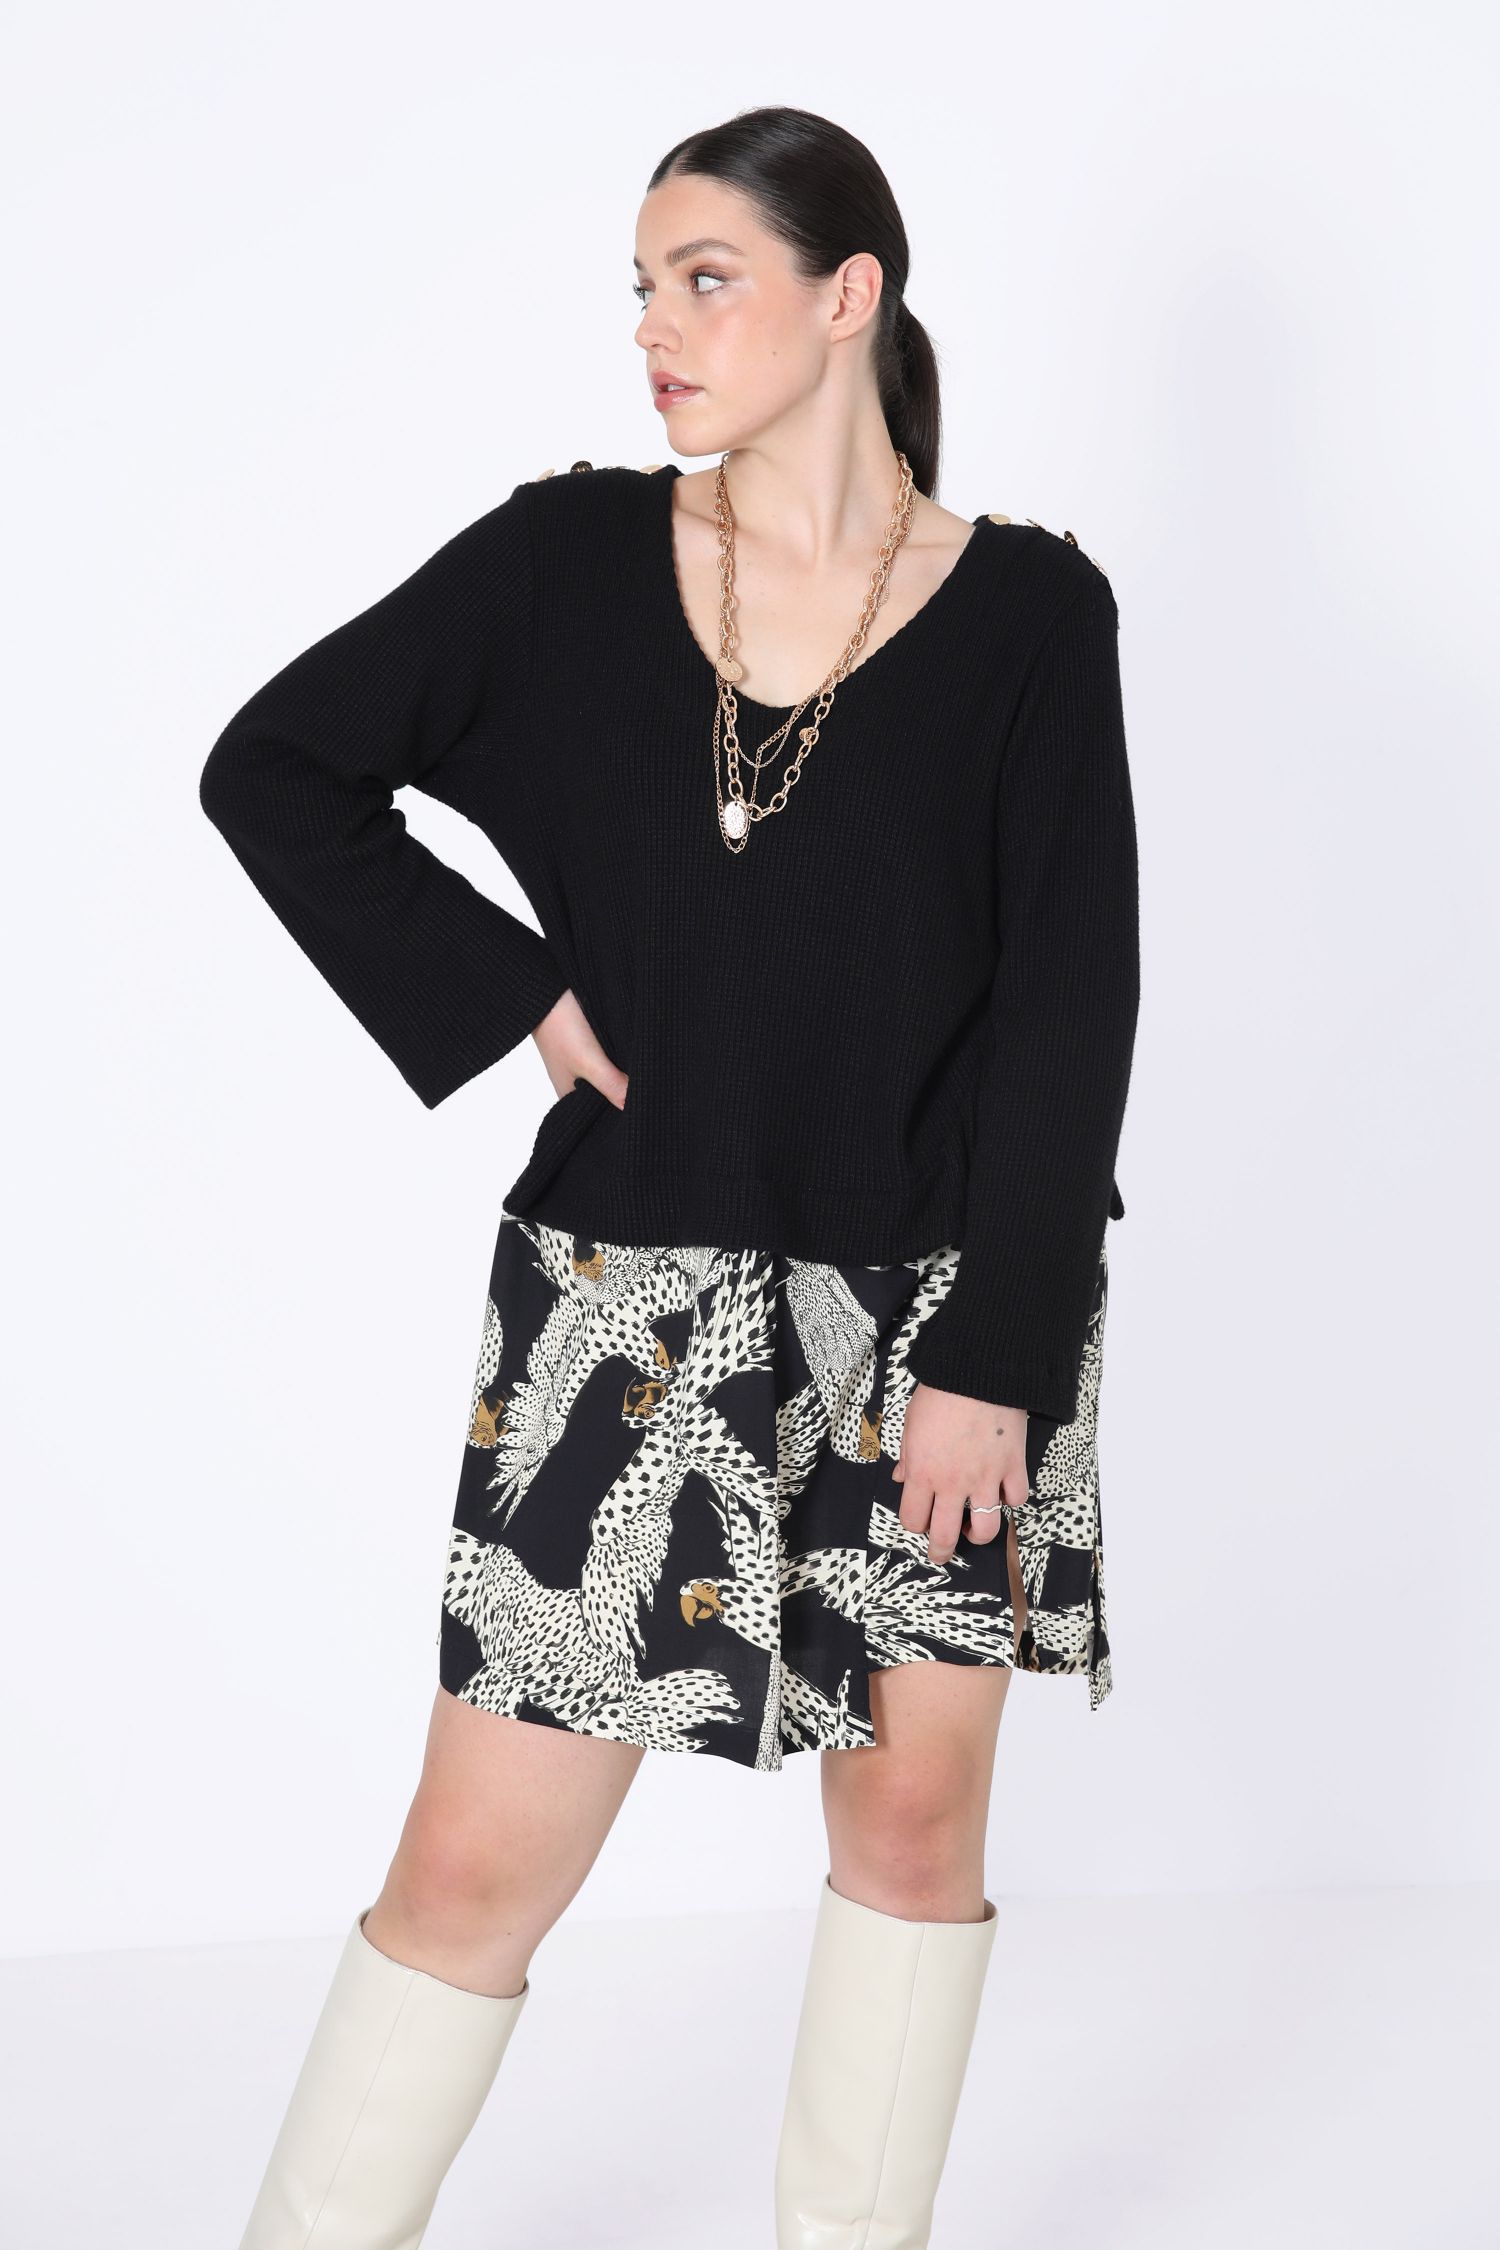 Plain knit sweater with overlay effect with printed bottom.